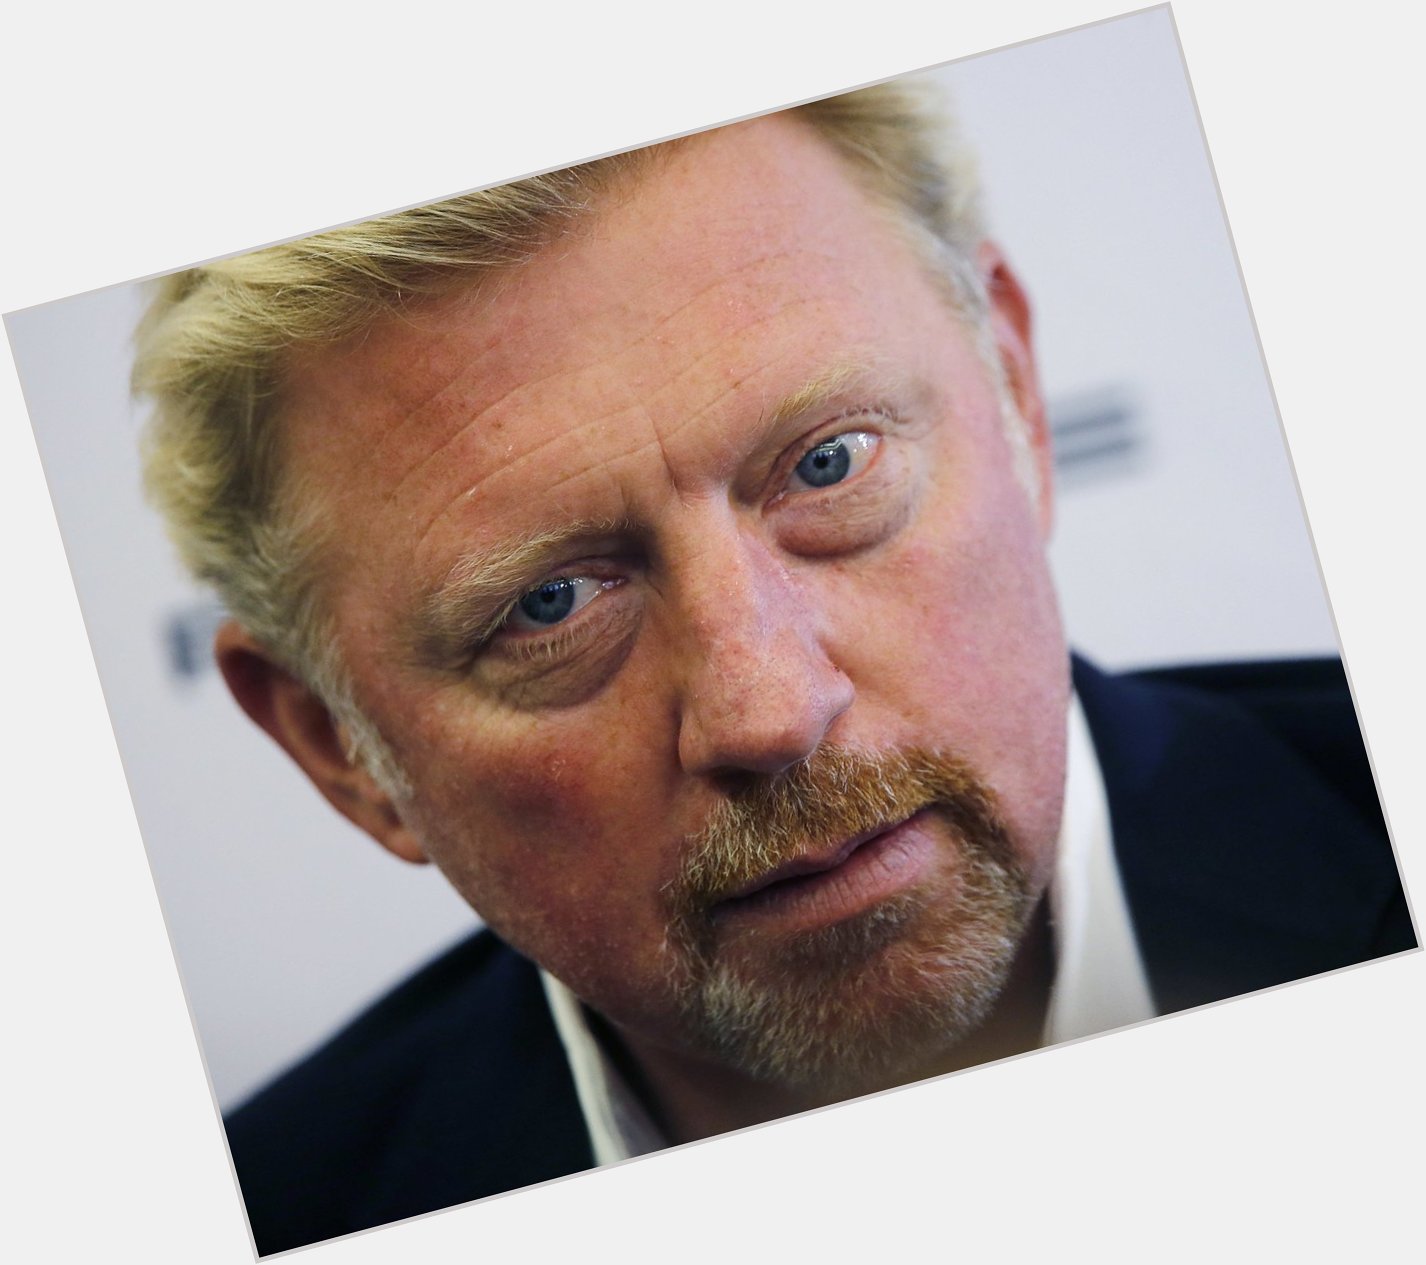 Happy birthday to my buddy Boris Becker by the way 50 years young. 